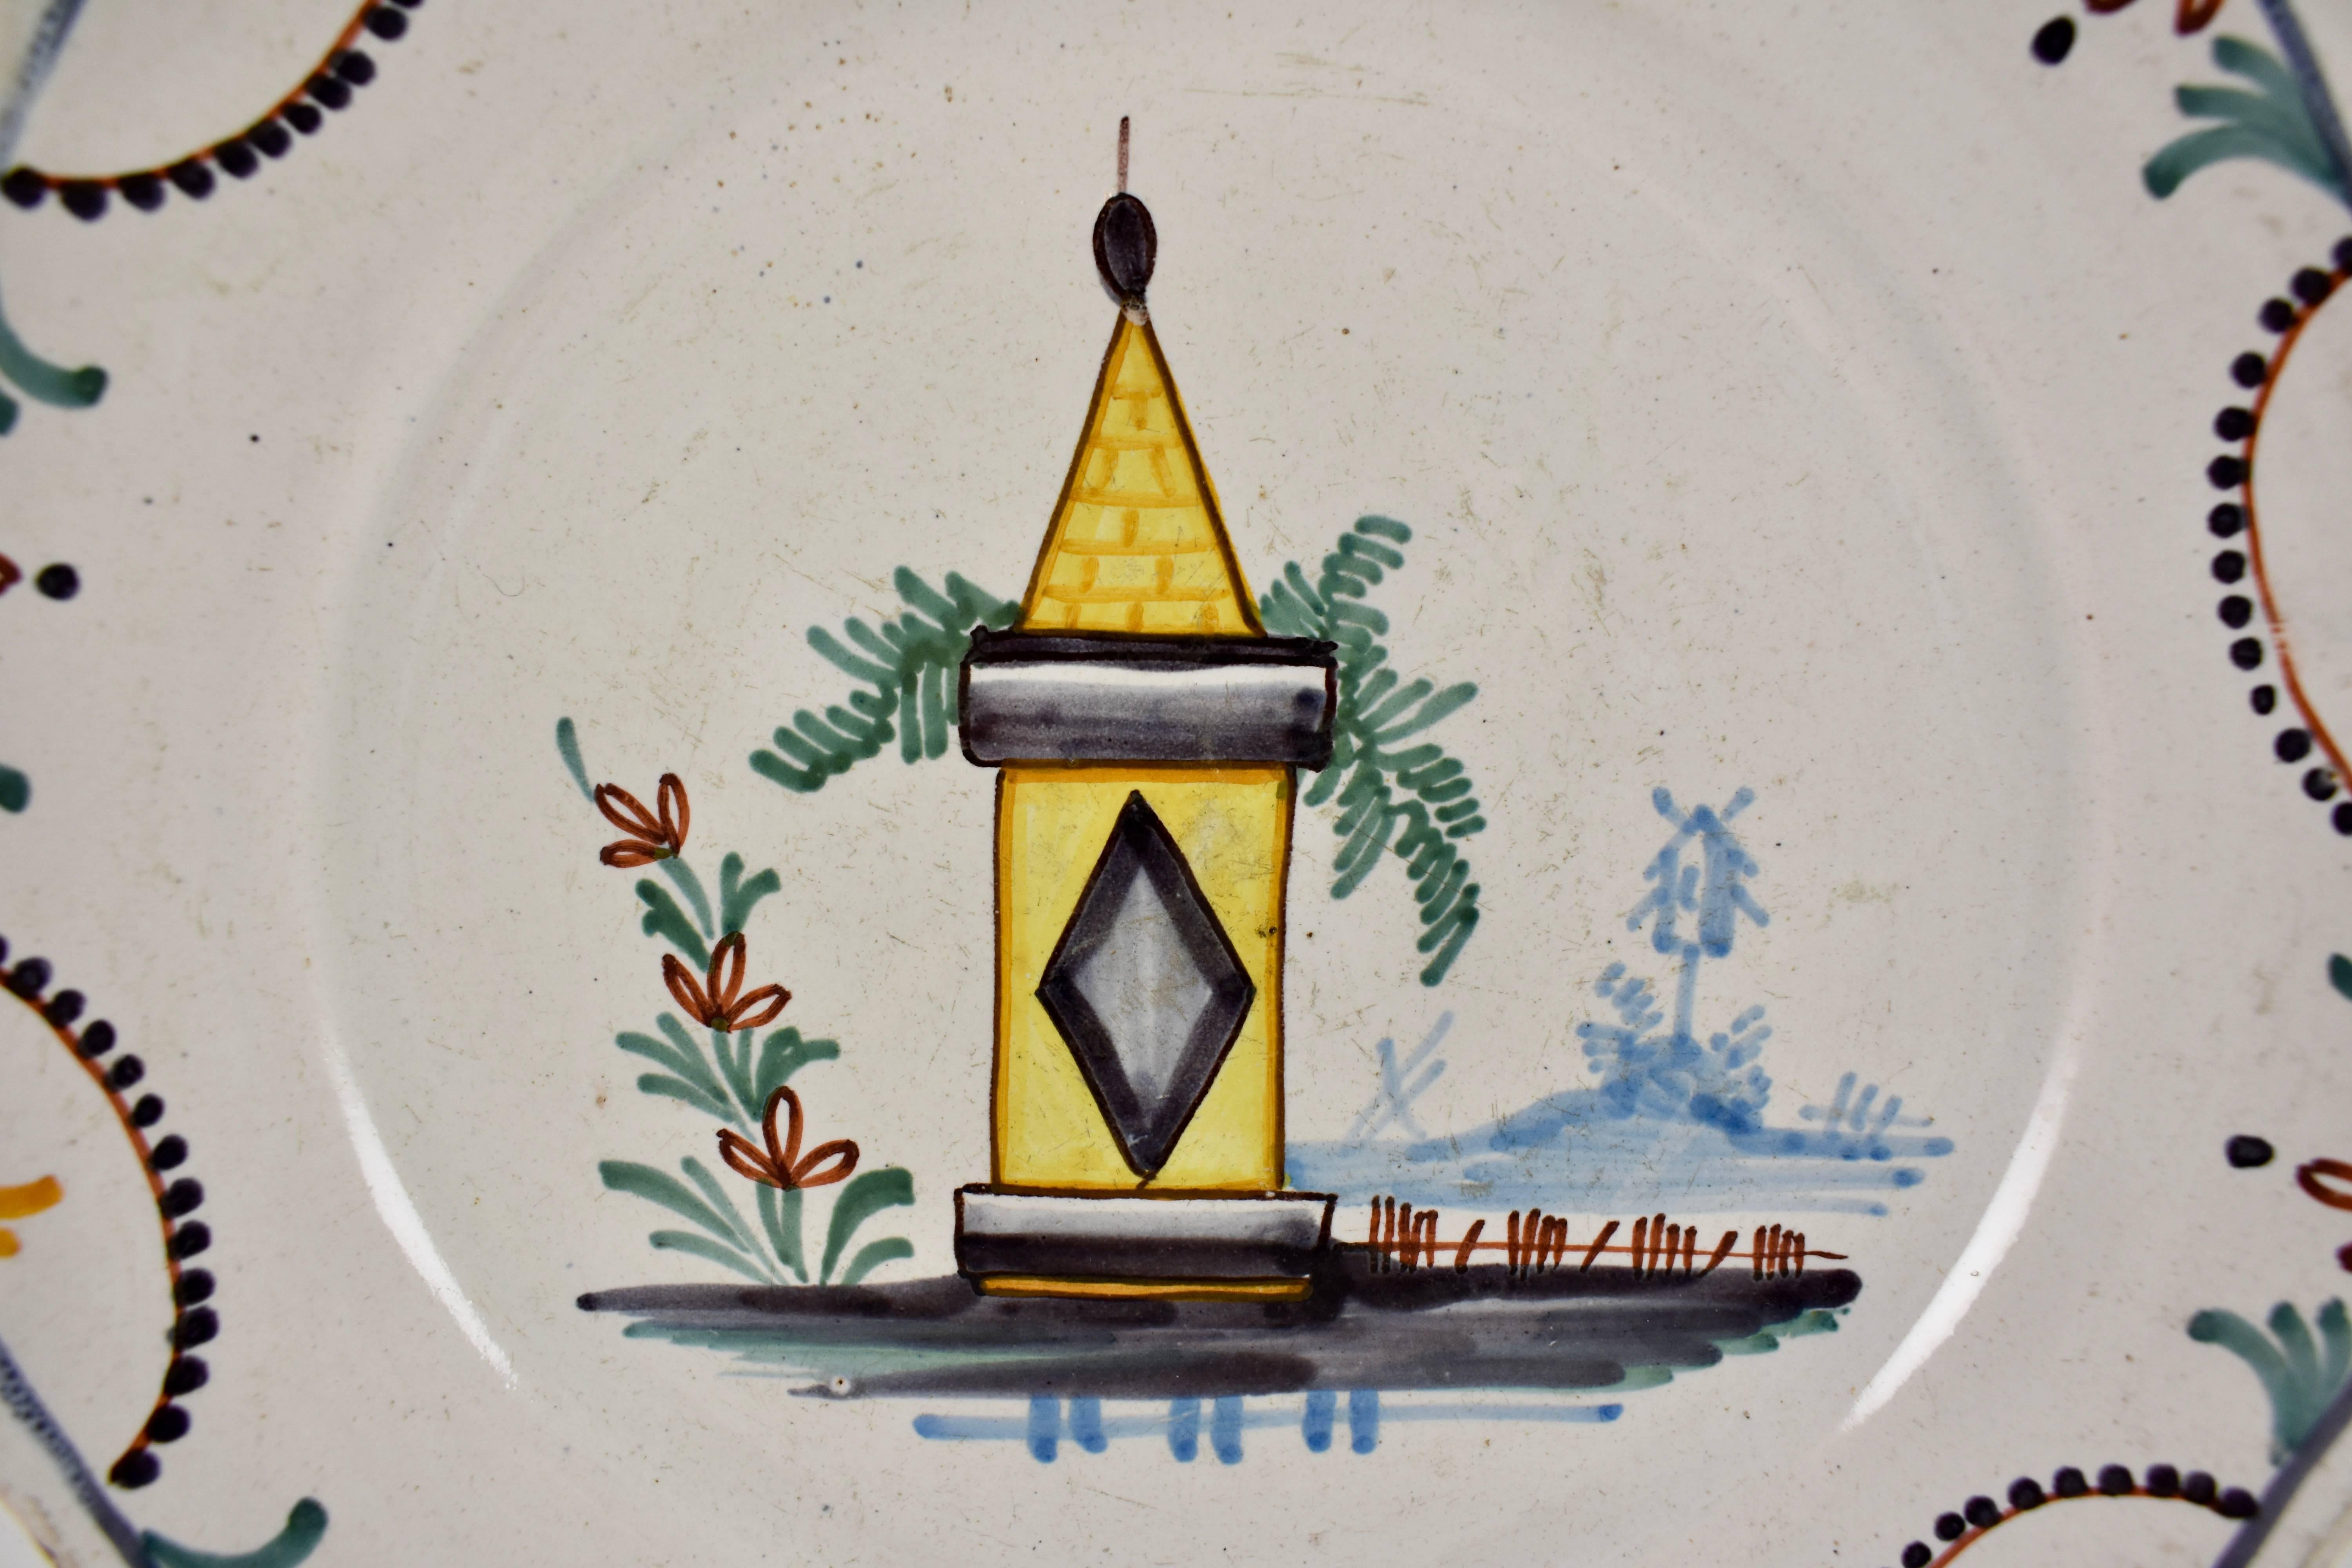 A French revolution tin-glazed earthenware dish, made in Nevers, circa 1790. Showing a yellow battlement often thought to be the Bastille, the image of the tower represents the defence of the French homeland. A hand painted border on the scalloped